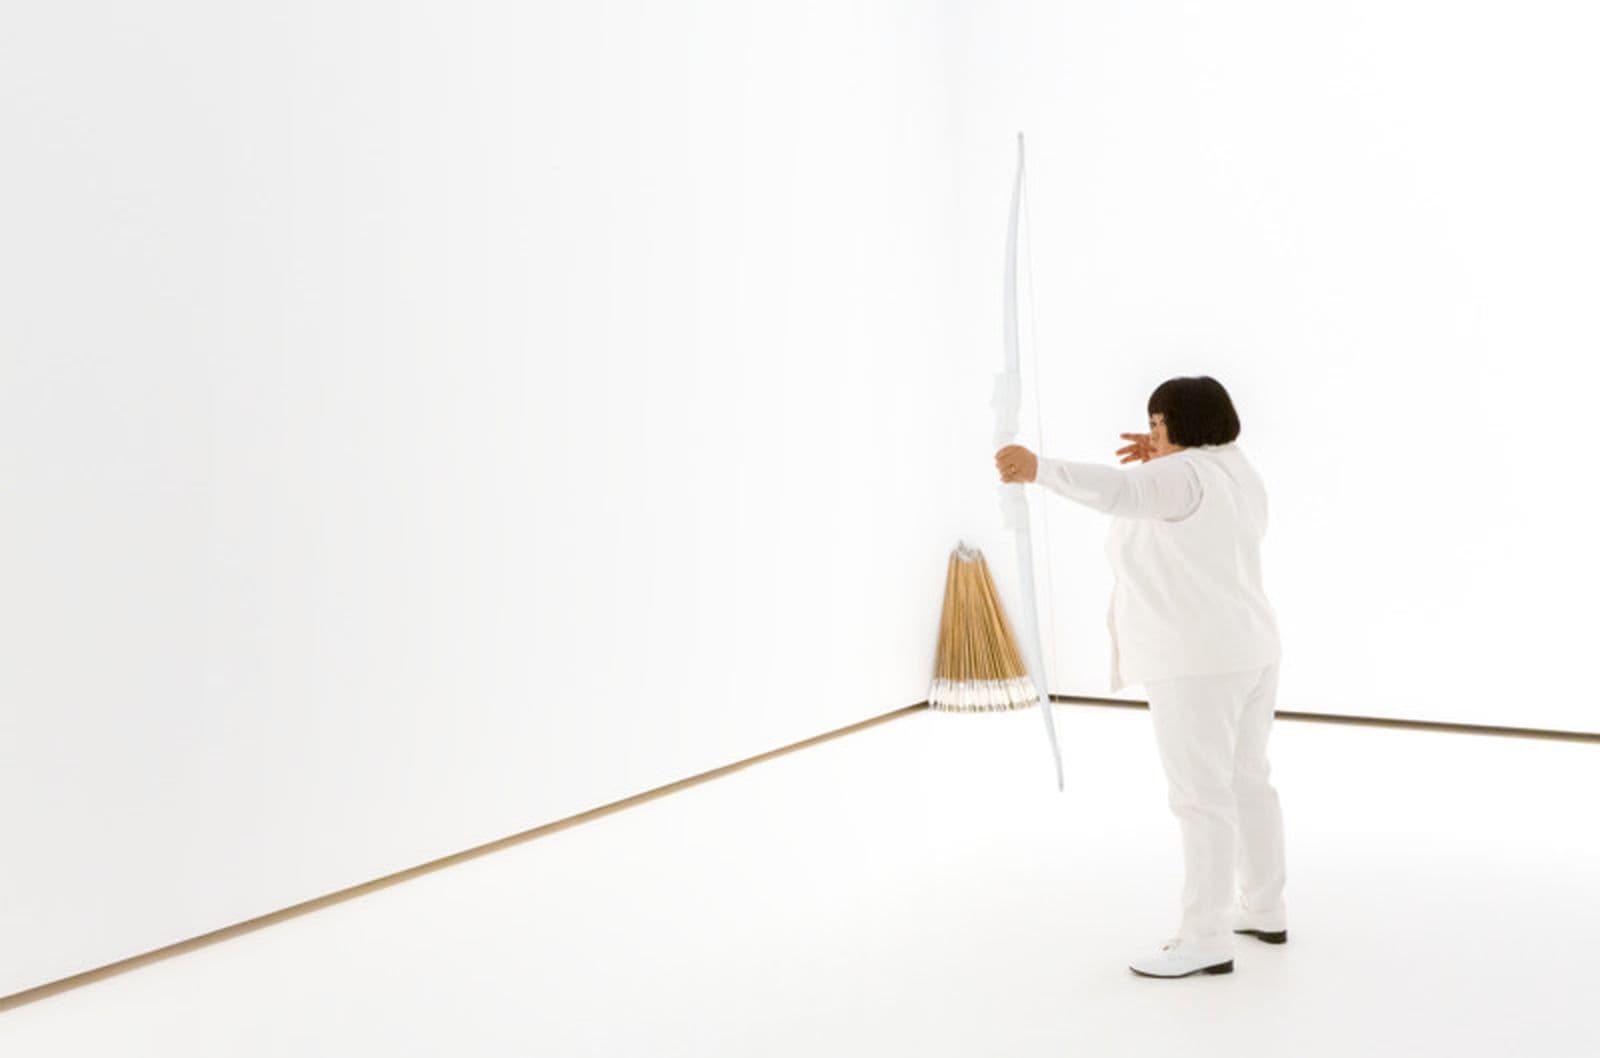 A woman dressed in a white room draws a bow